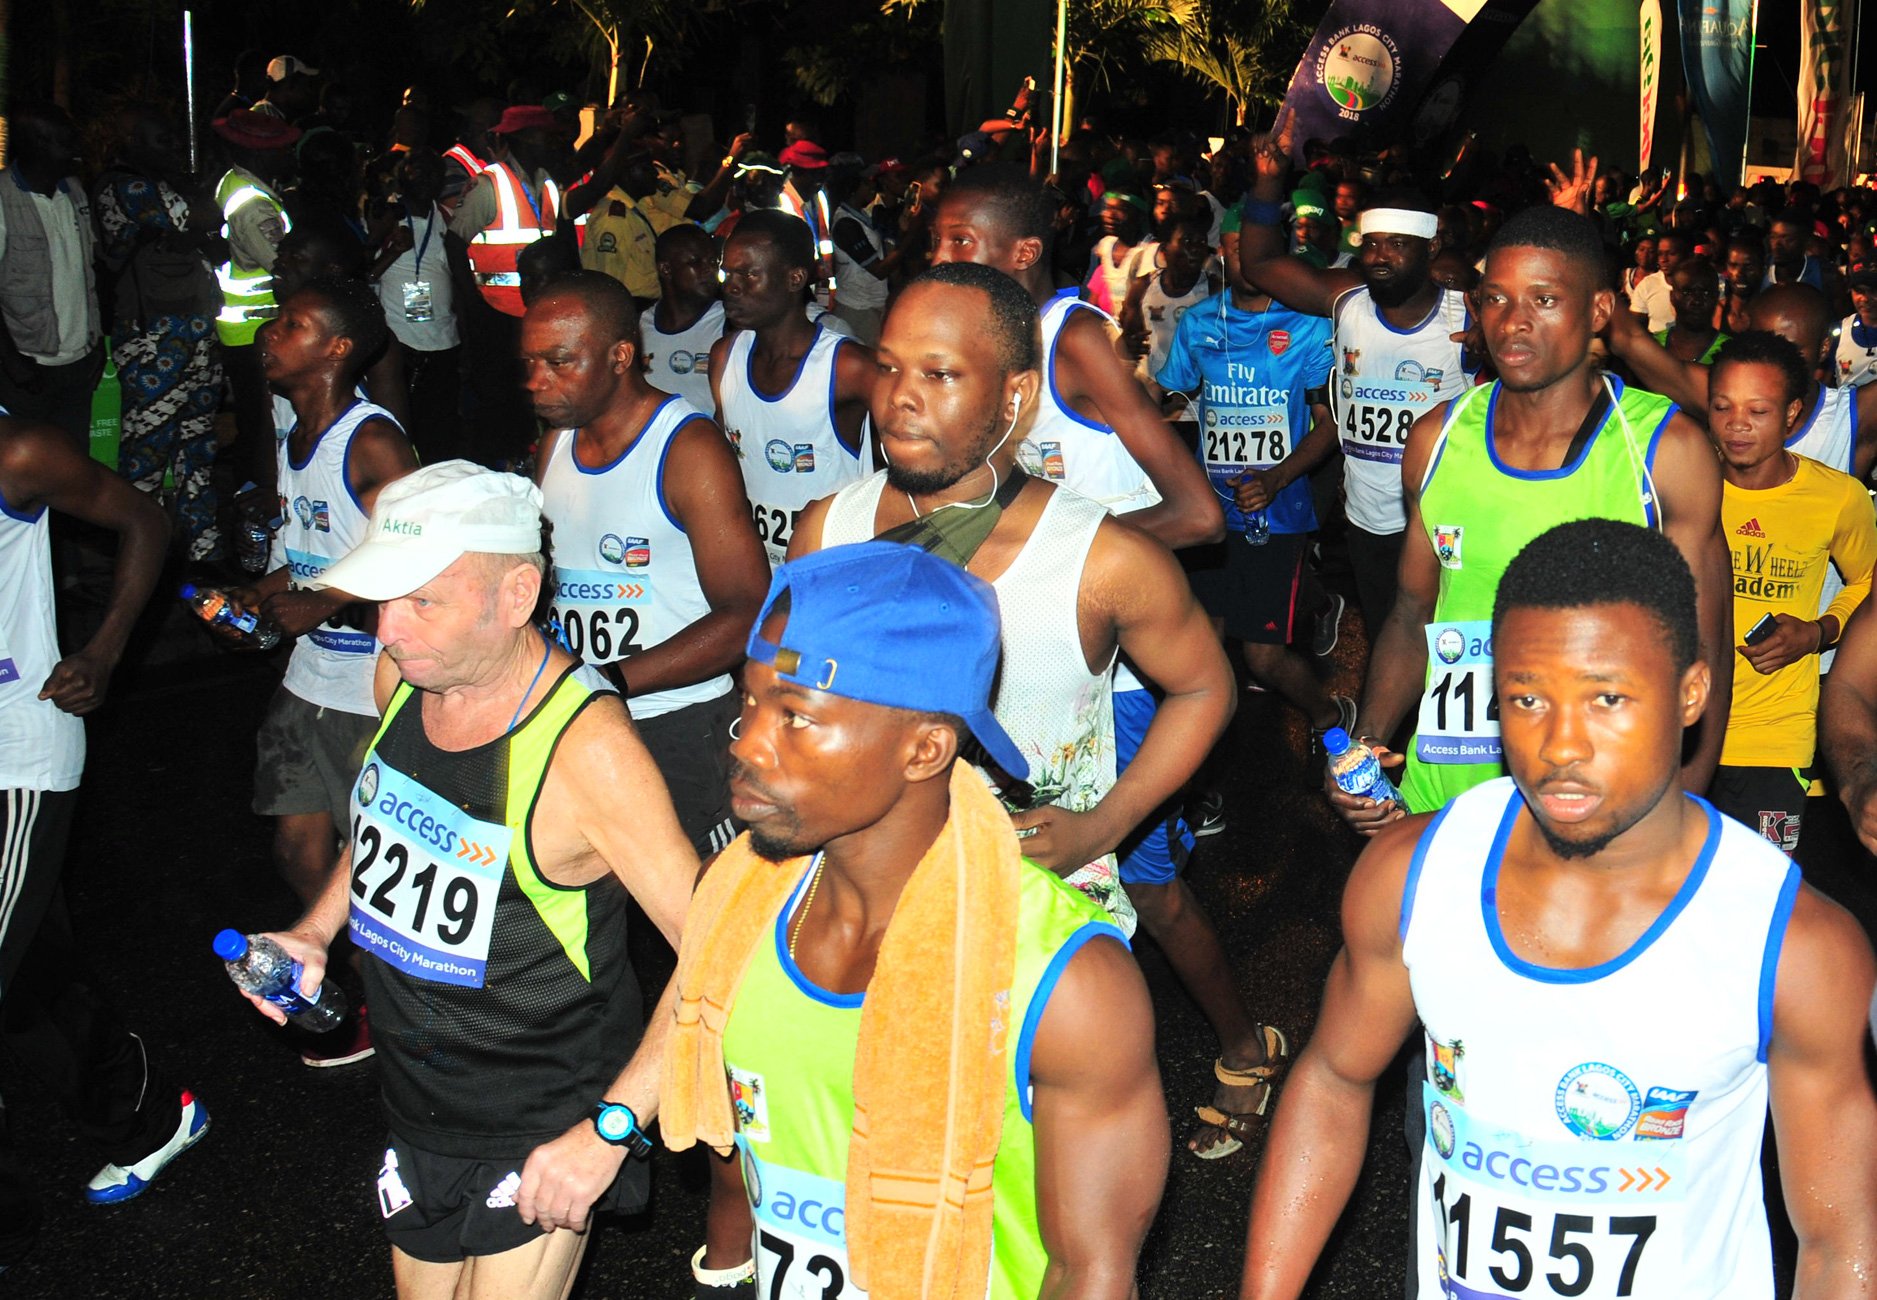 The 4th edition of the Access Bank Lagos City Marathon has been fixed for Saturday, February 2, 2019 in Lagos, Nigeria / Photo: LOC